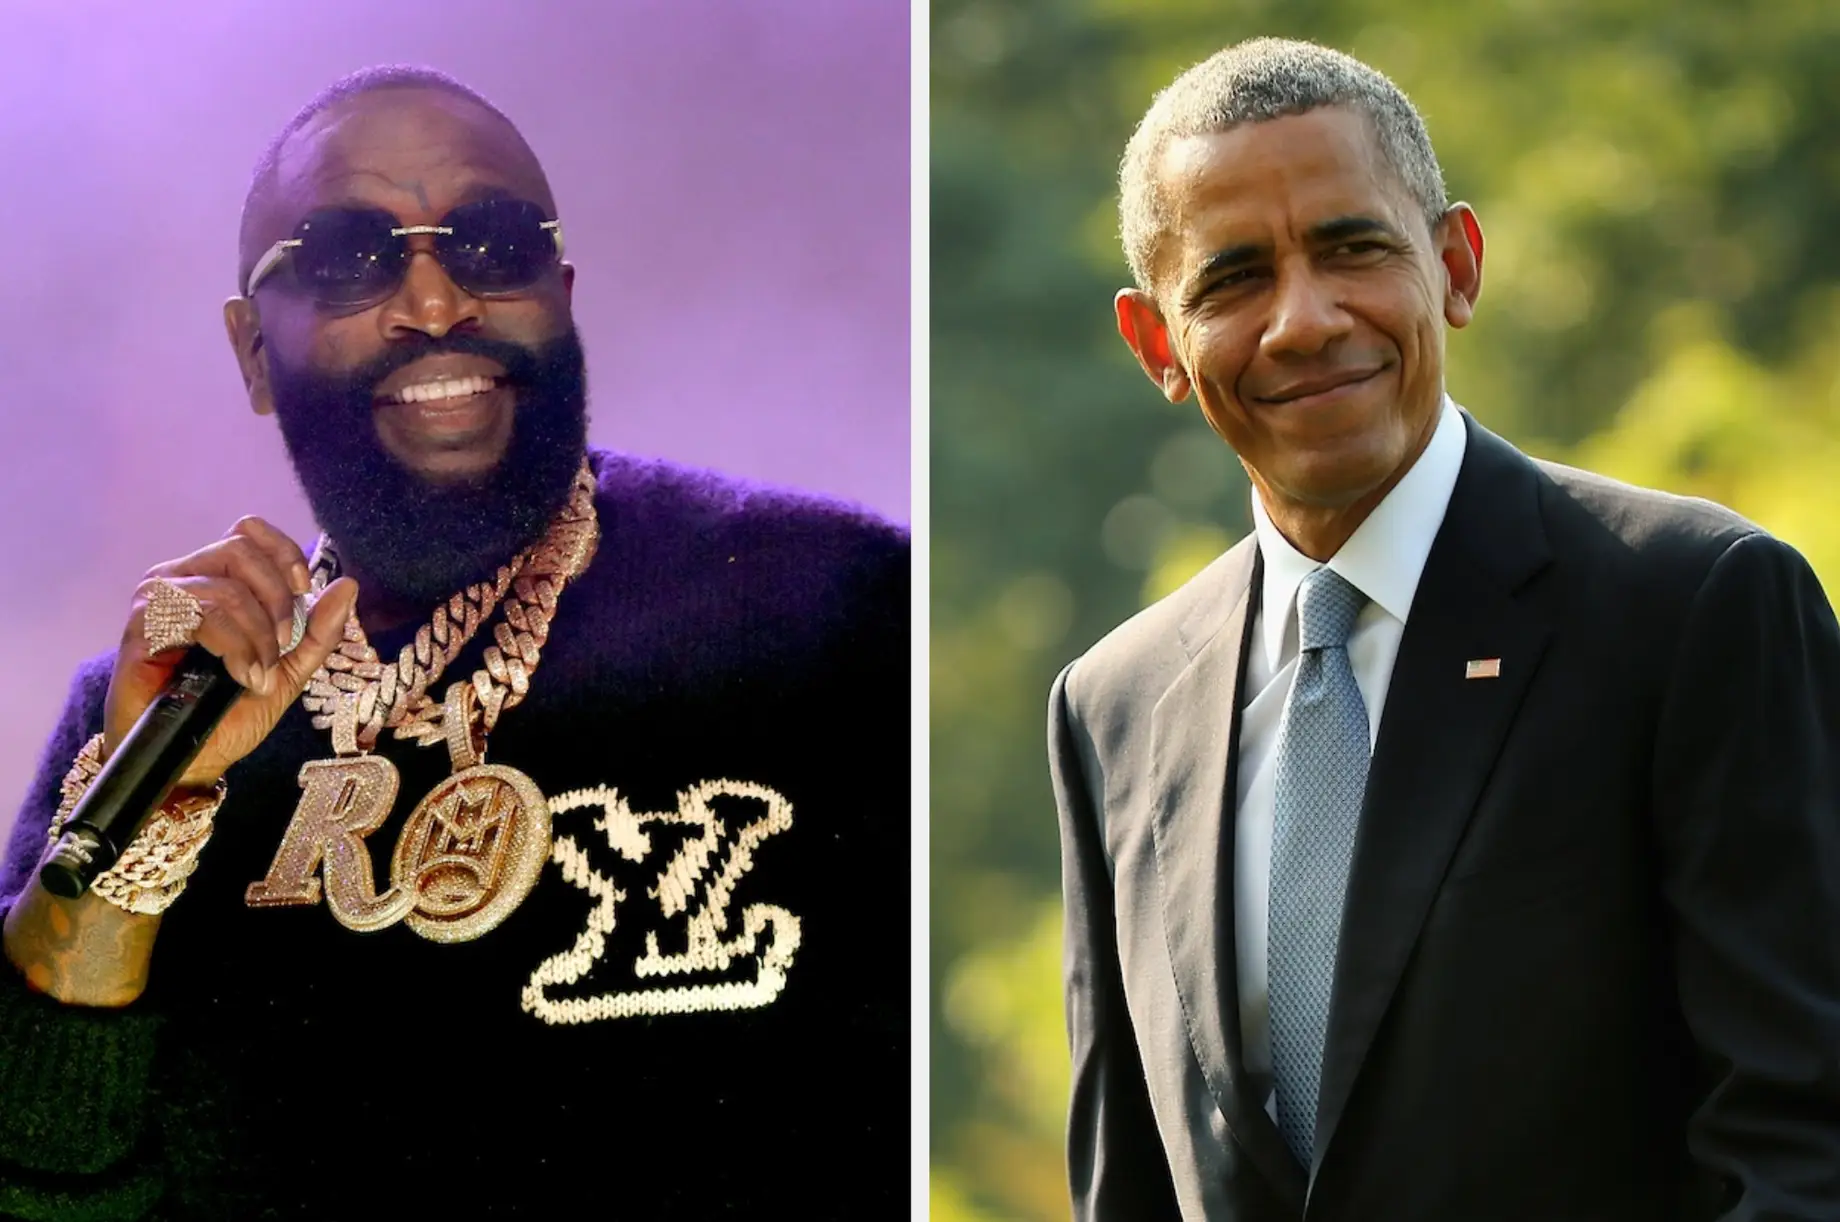 Rick Ross Recalls His Ankle Monitor Going Off in Front of President Obama at the White House [Video]